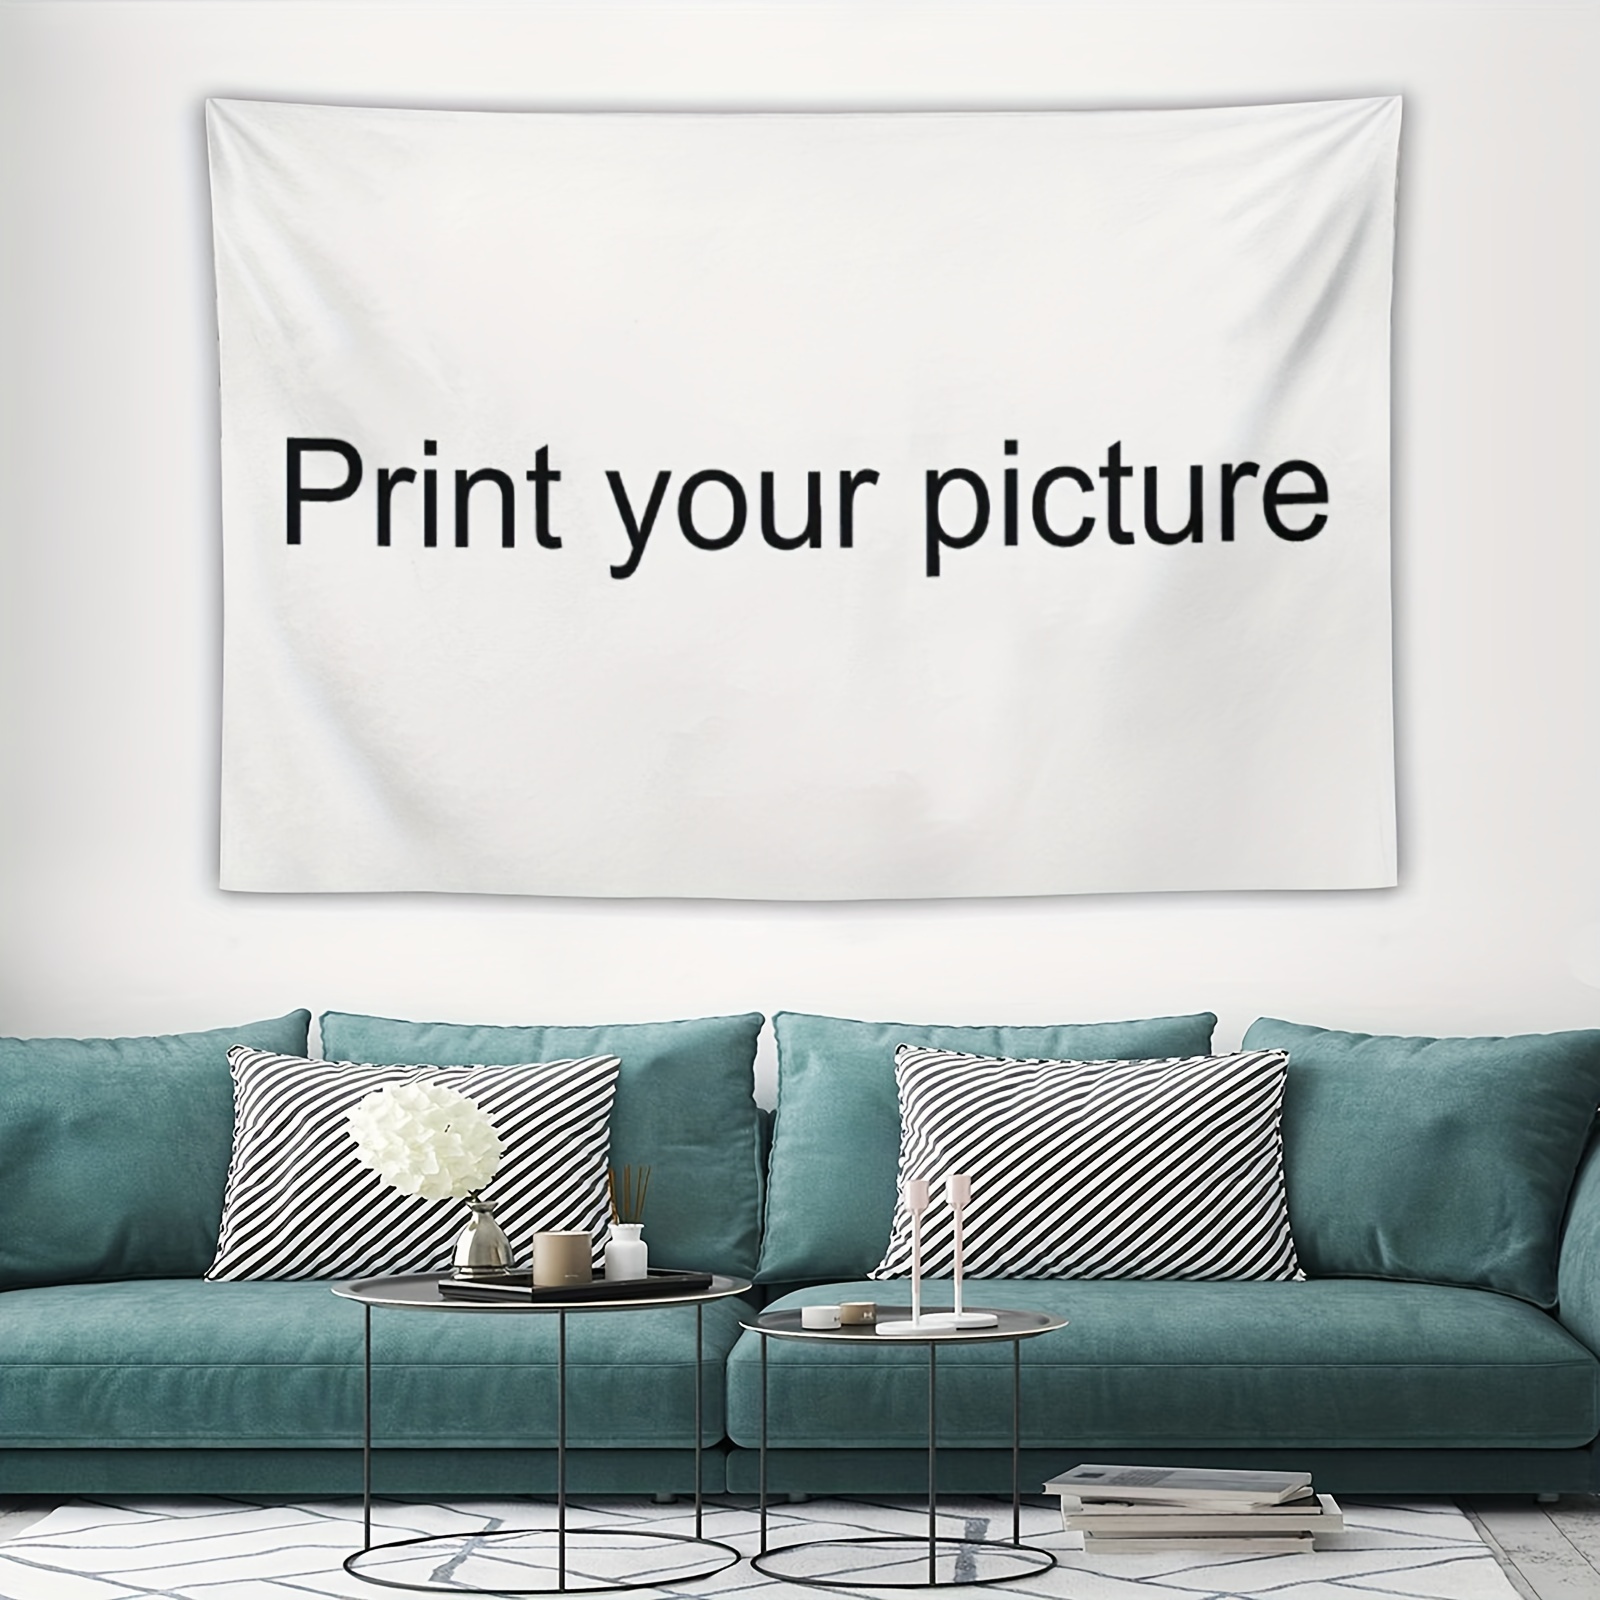 

Customized Tapestry For Home Decor - Personalized Photo Print, Custom Image Wall Hanging, Unique Gift For Anniversary, Birthday, Wedding, Mother's Day, Party Decor, Logo/banner Design, Polyester 100%